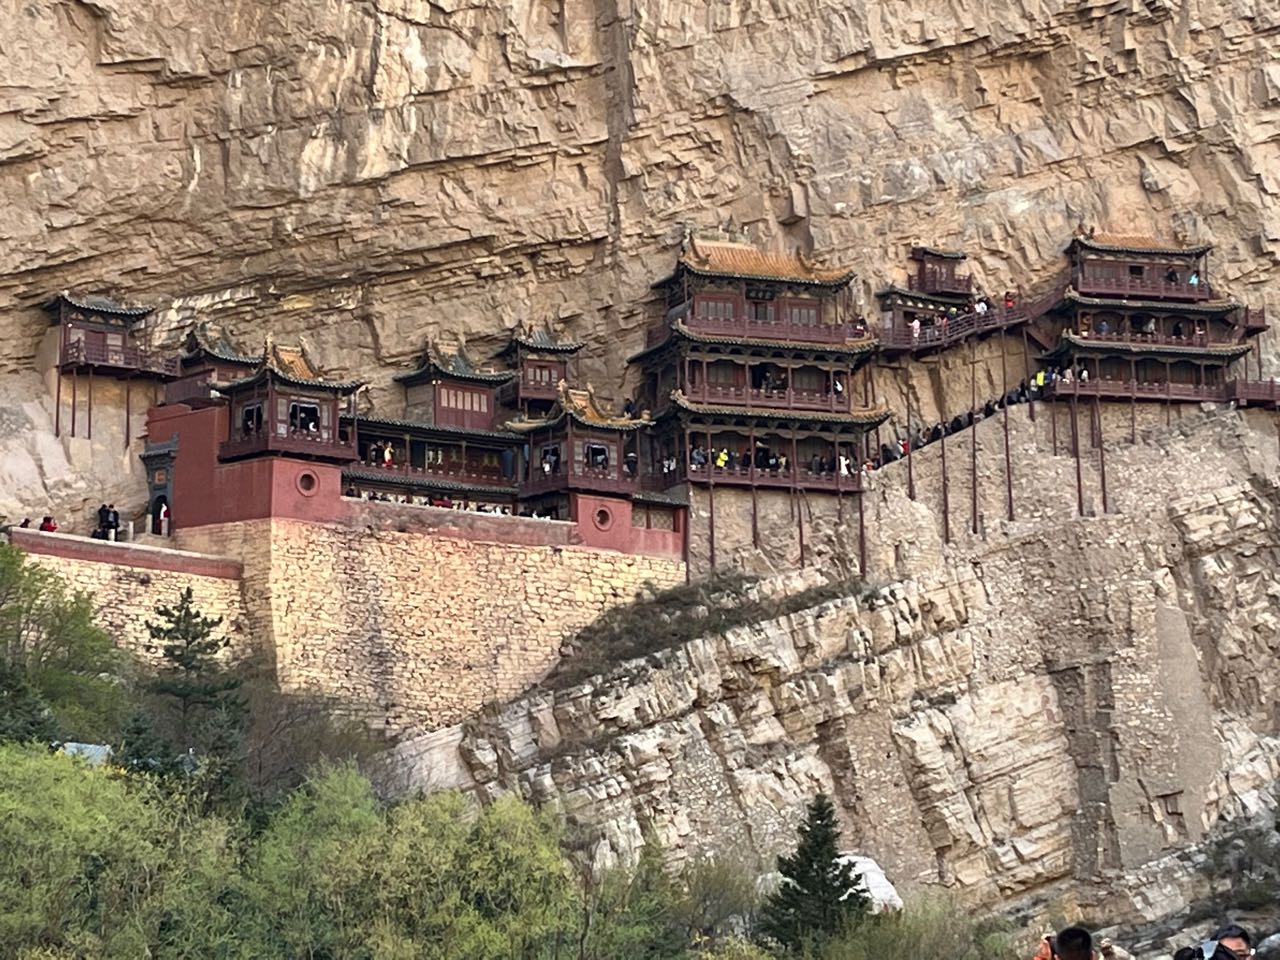 Shanxi’s Hanging Temple draws thousands of visitors to explore its lofty balconies and bridges. /Wendyl Martin